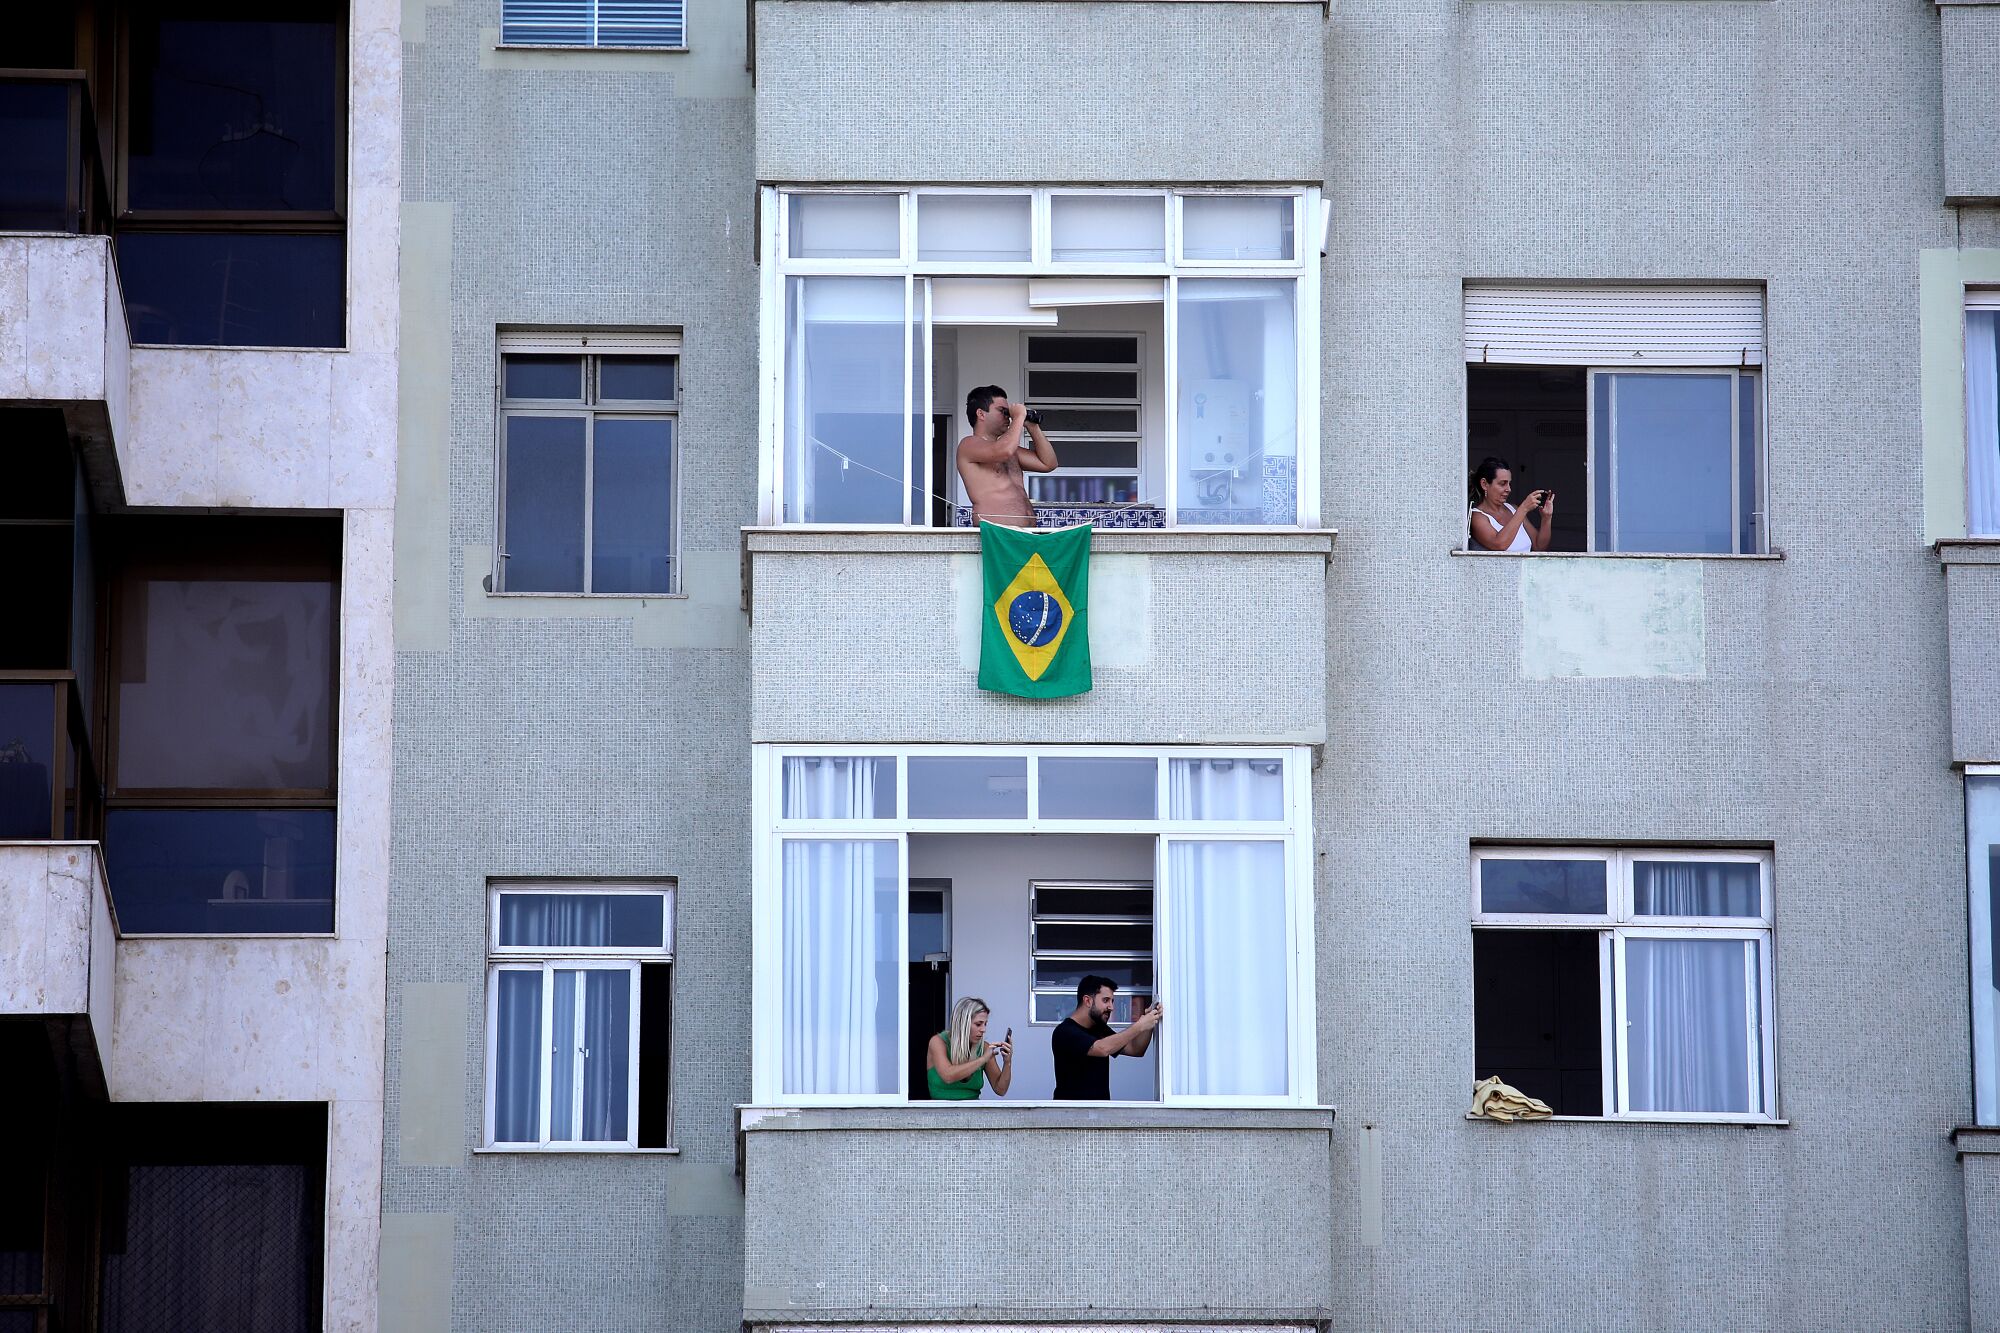  People peer out of their windows during a celebration.